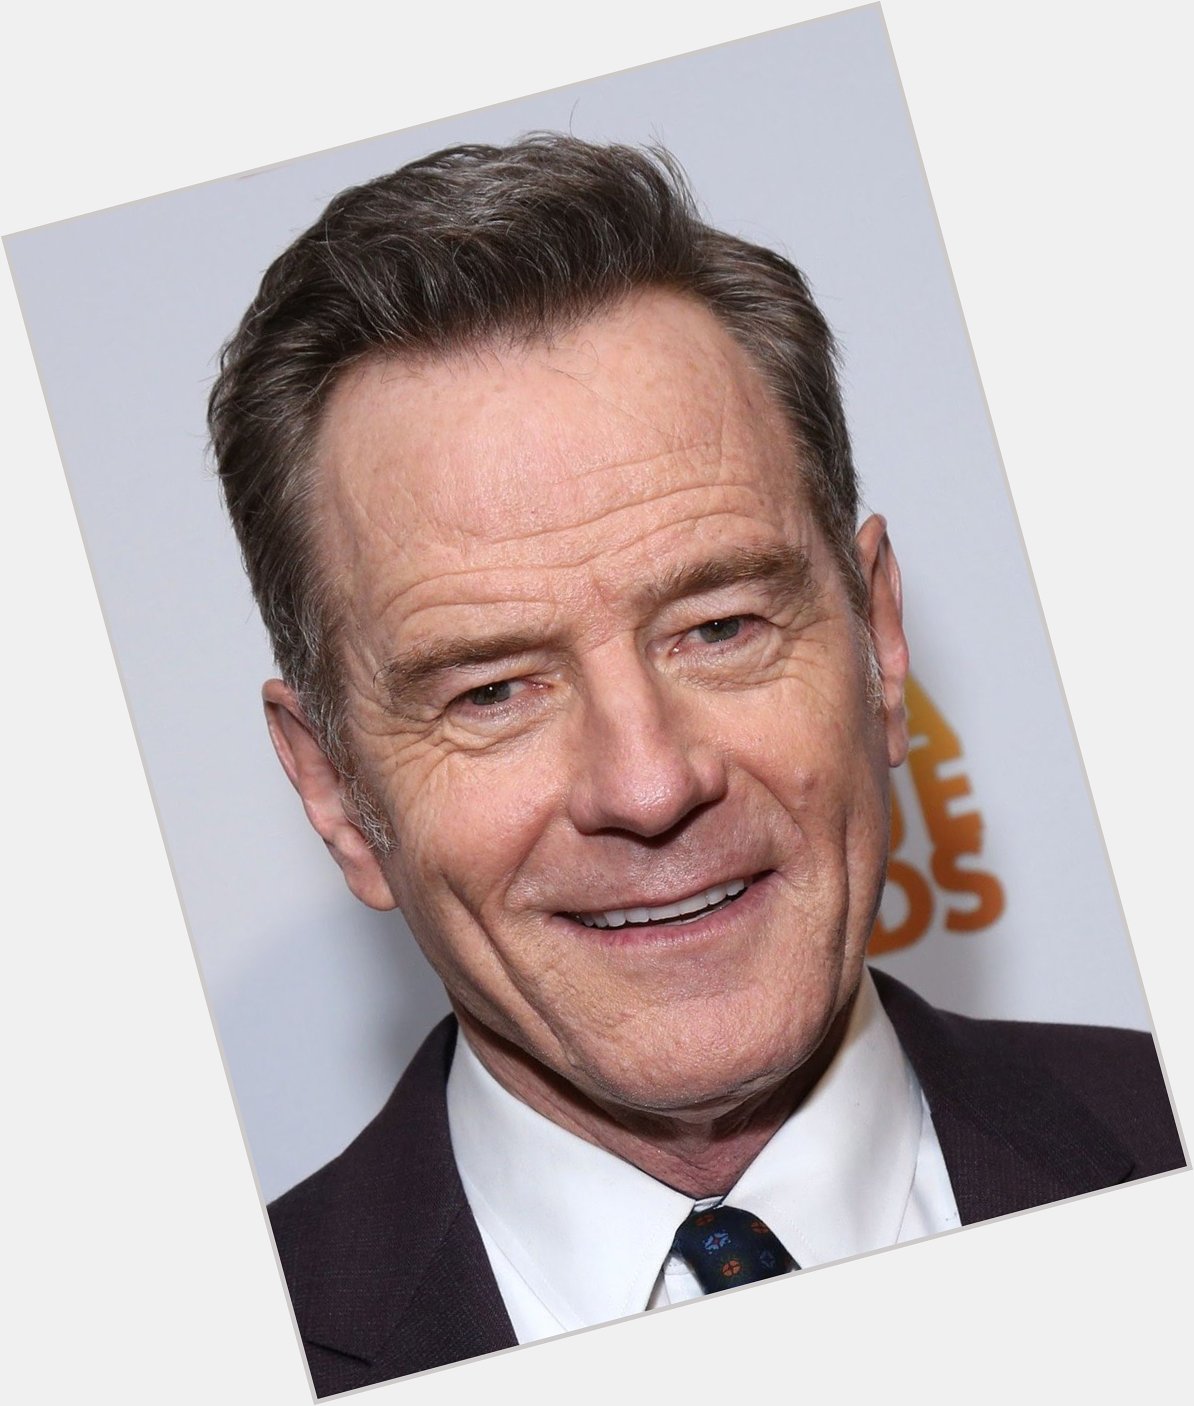 Happy 66th birthday to Bryan Cranston!! What\s your favorite show or film starring Bryan? 